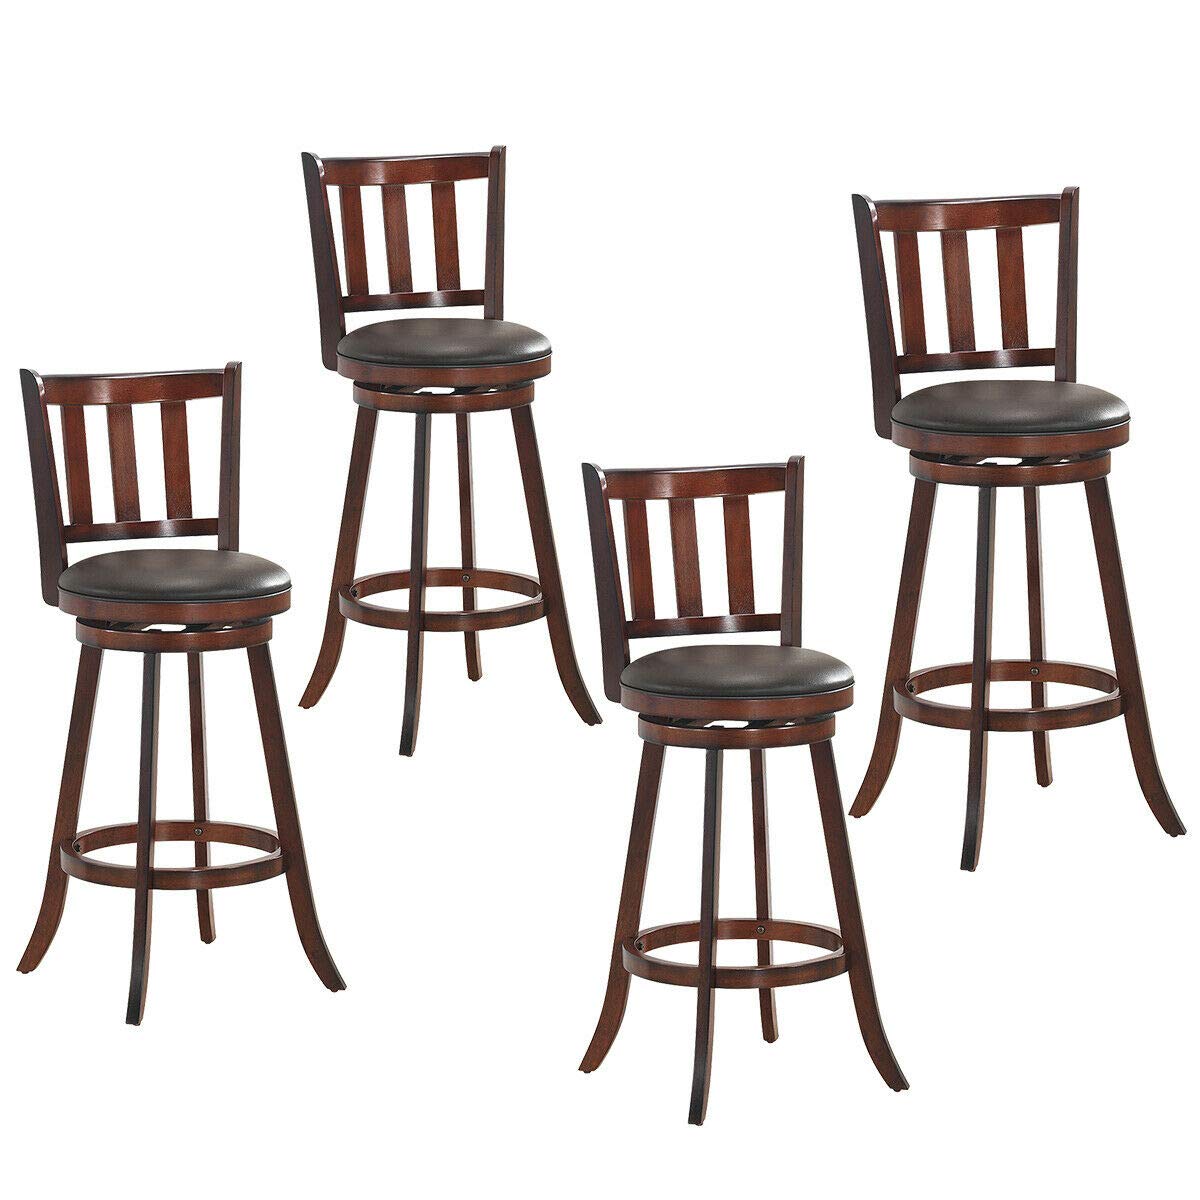 Bar Stools Set of 2 or 4, Counter Height Dining Chair, Fabric Upholstered 360 Degree Swivel